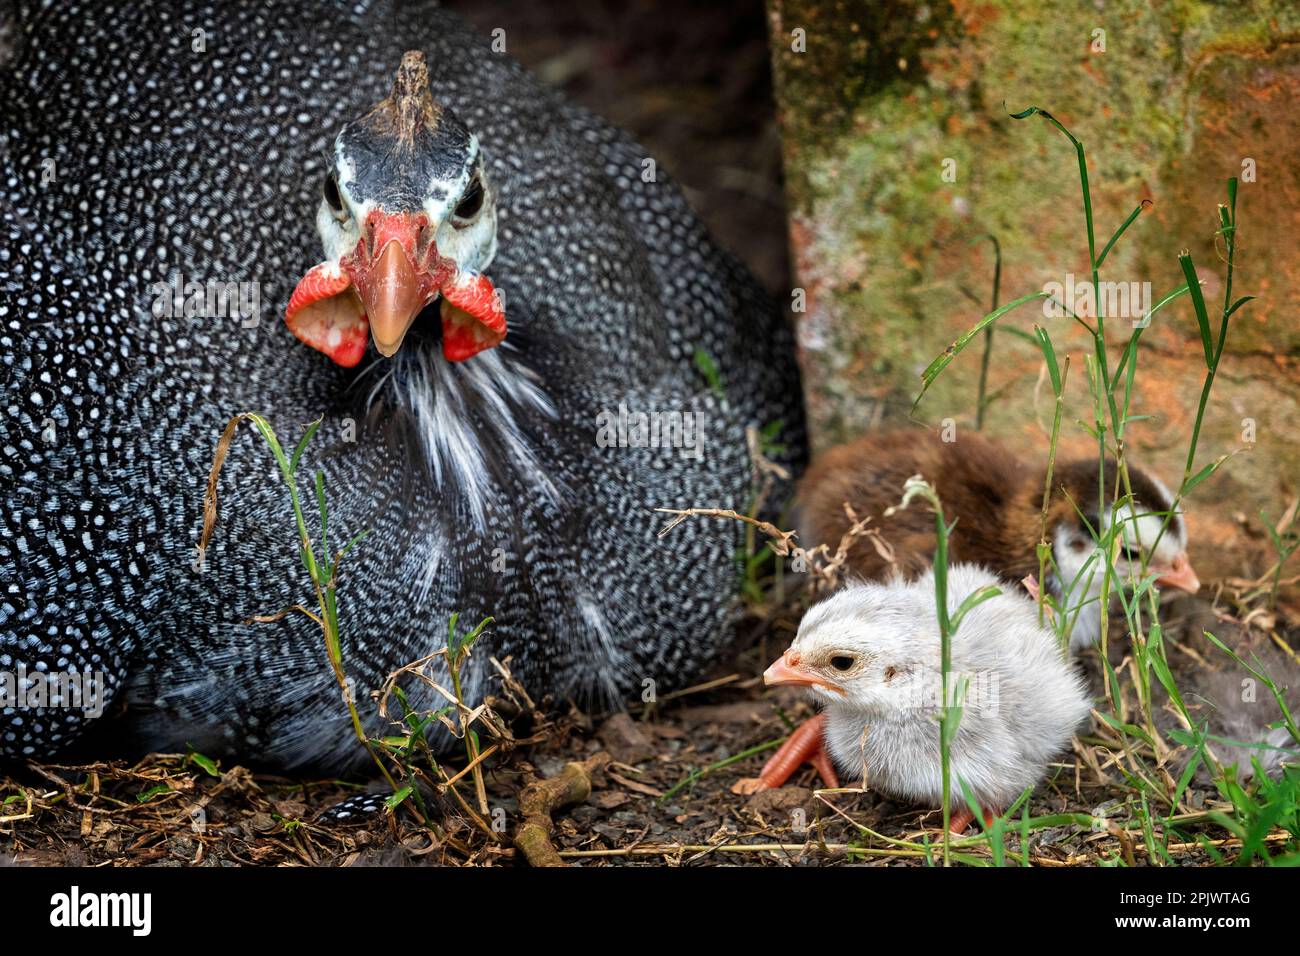 Adult helmeted guineafowl (Numida meleagris) sitting on hatching eggs with newly hatched chicks close by. Stock Photo